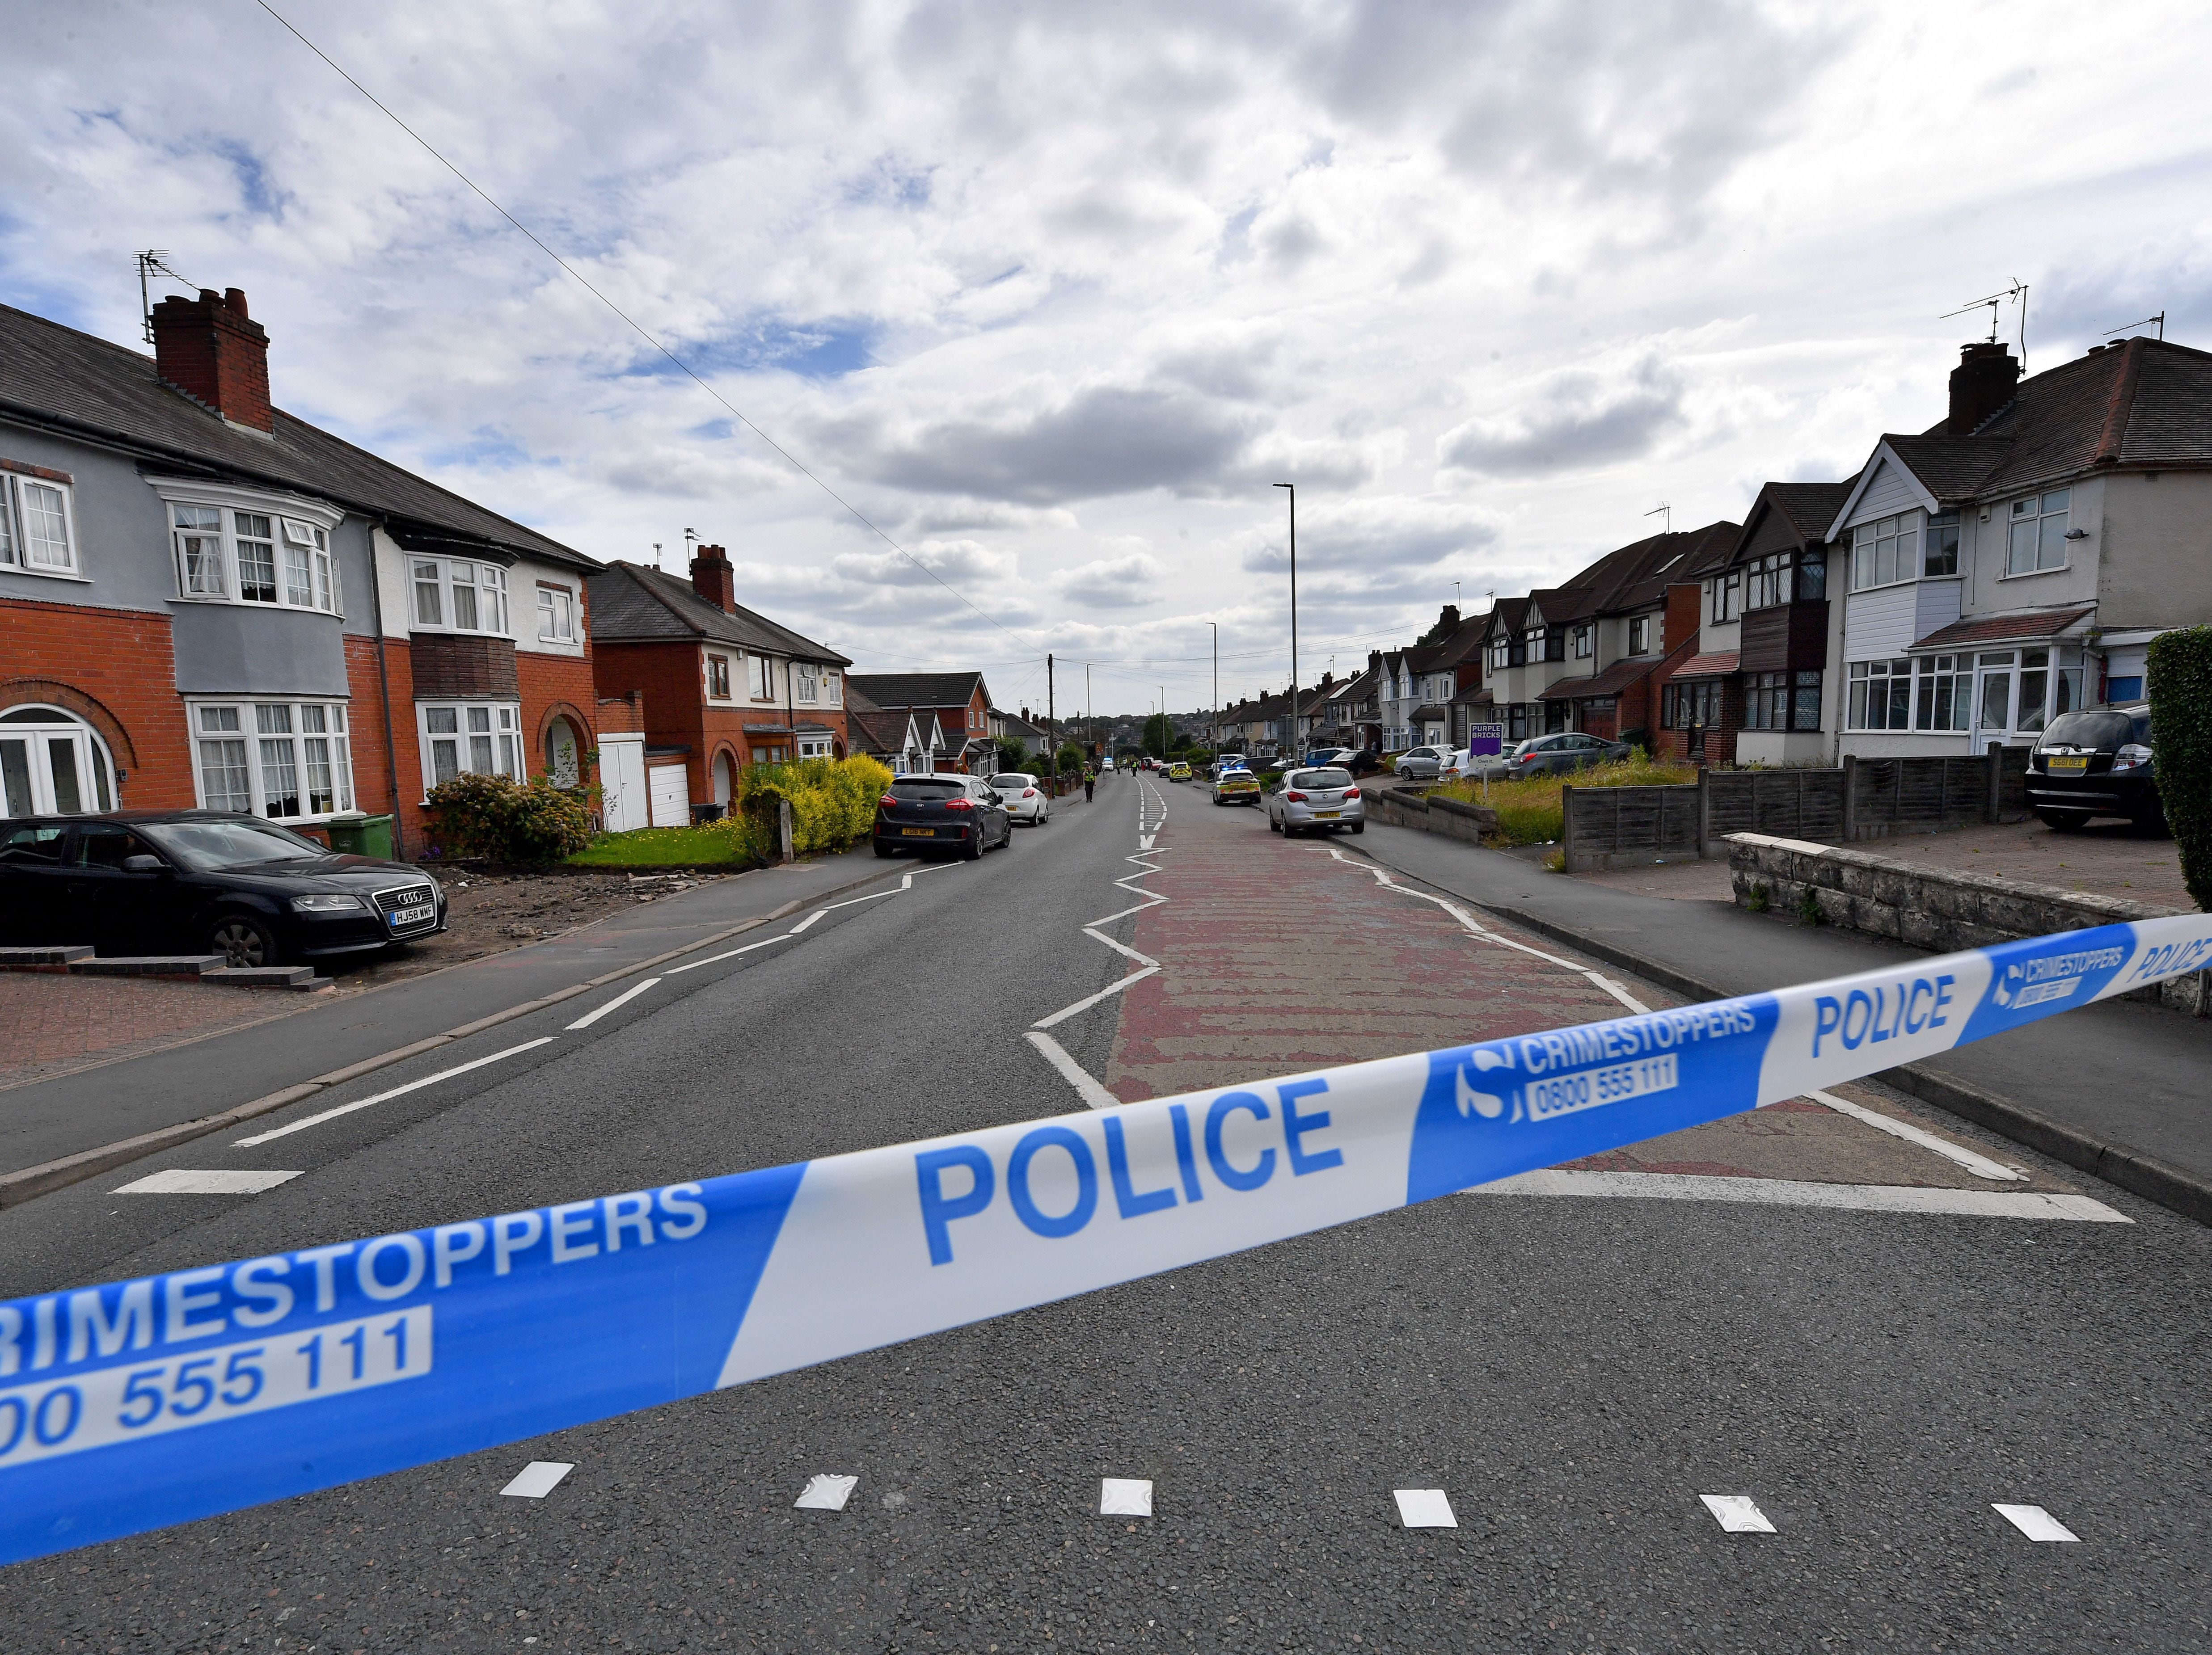 Watch: Two men arrested after stabbing in Dudley that left three injured